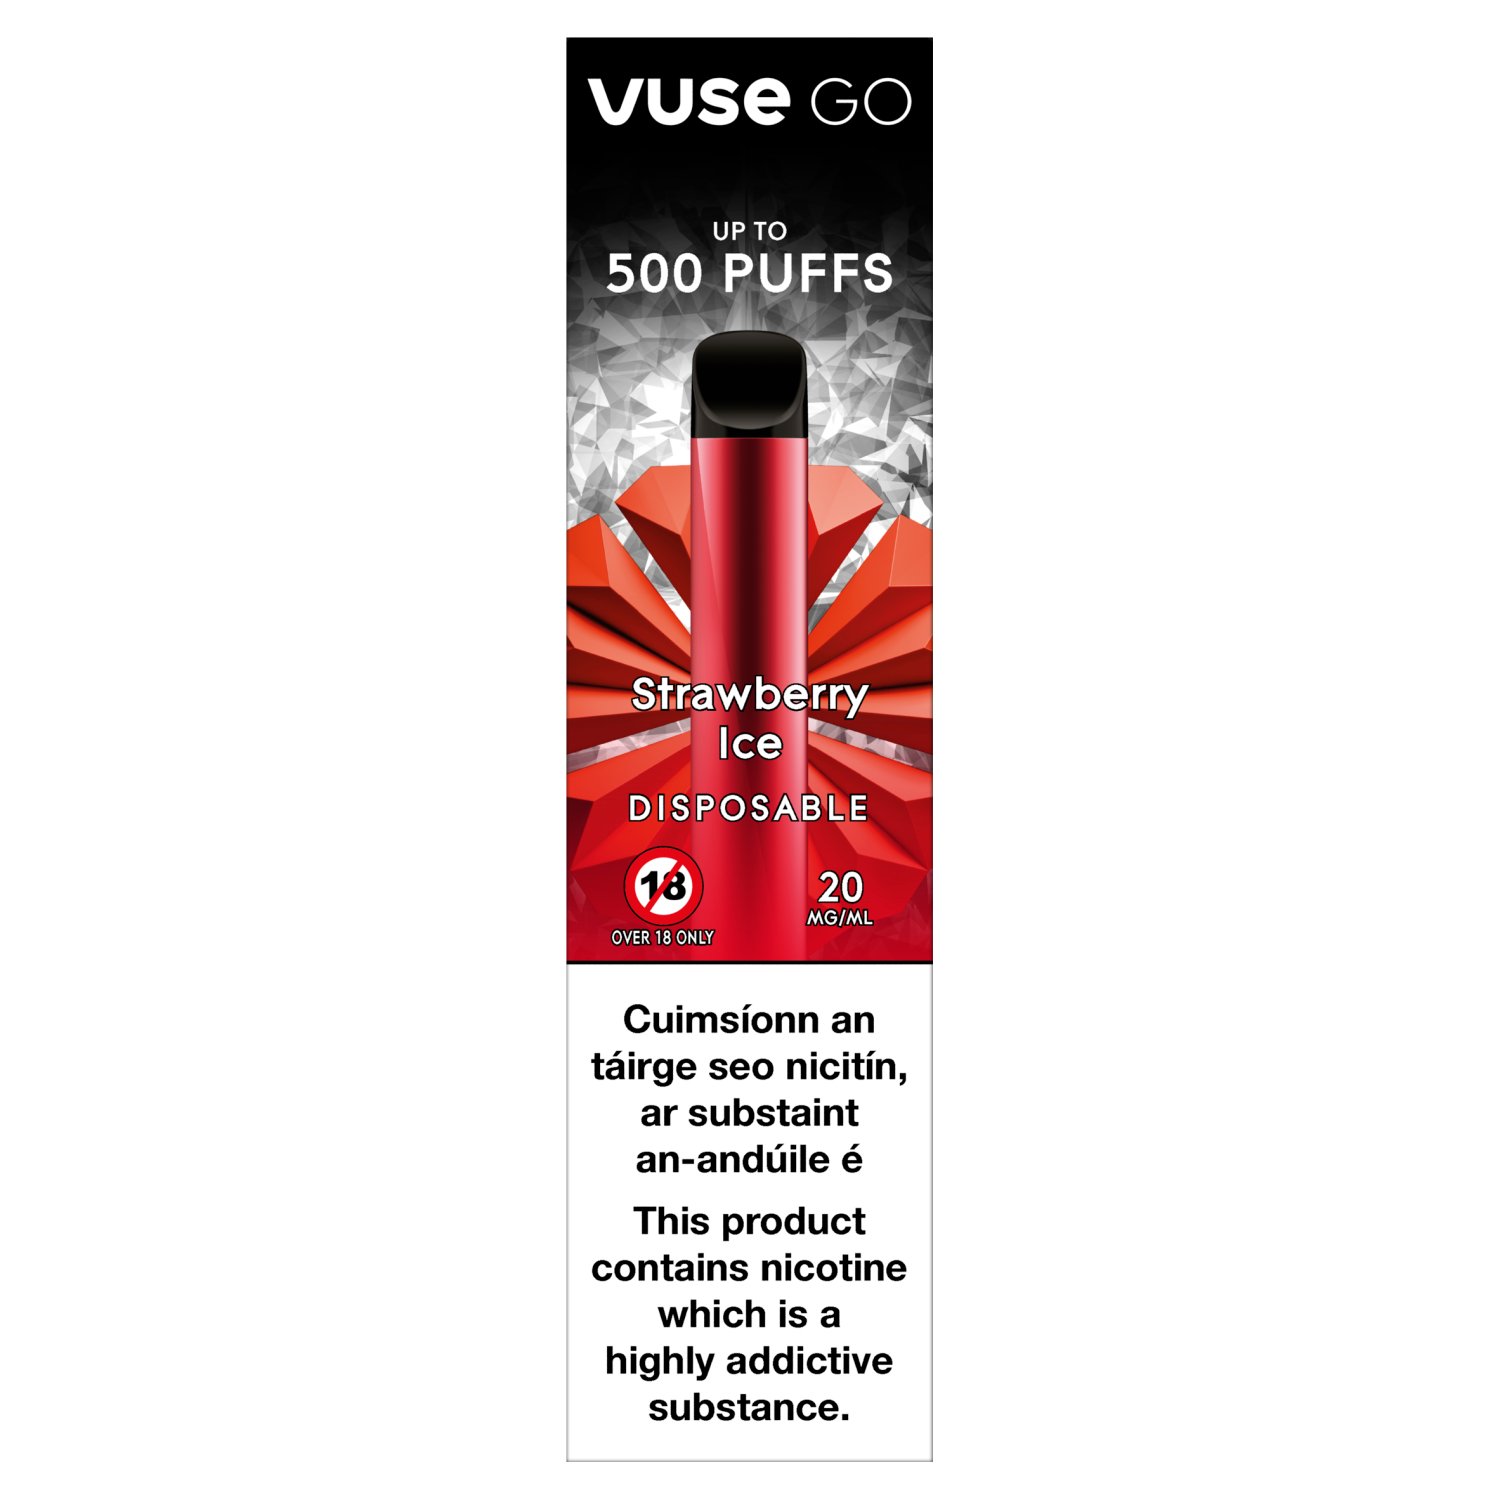 Vuse Go Disposable Strawberry Ice (20 ml)